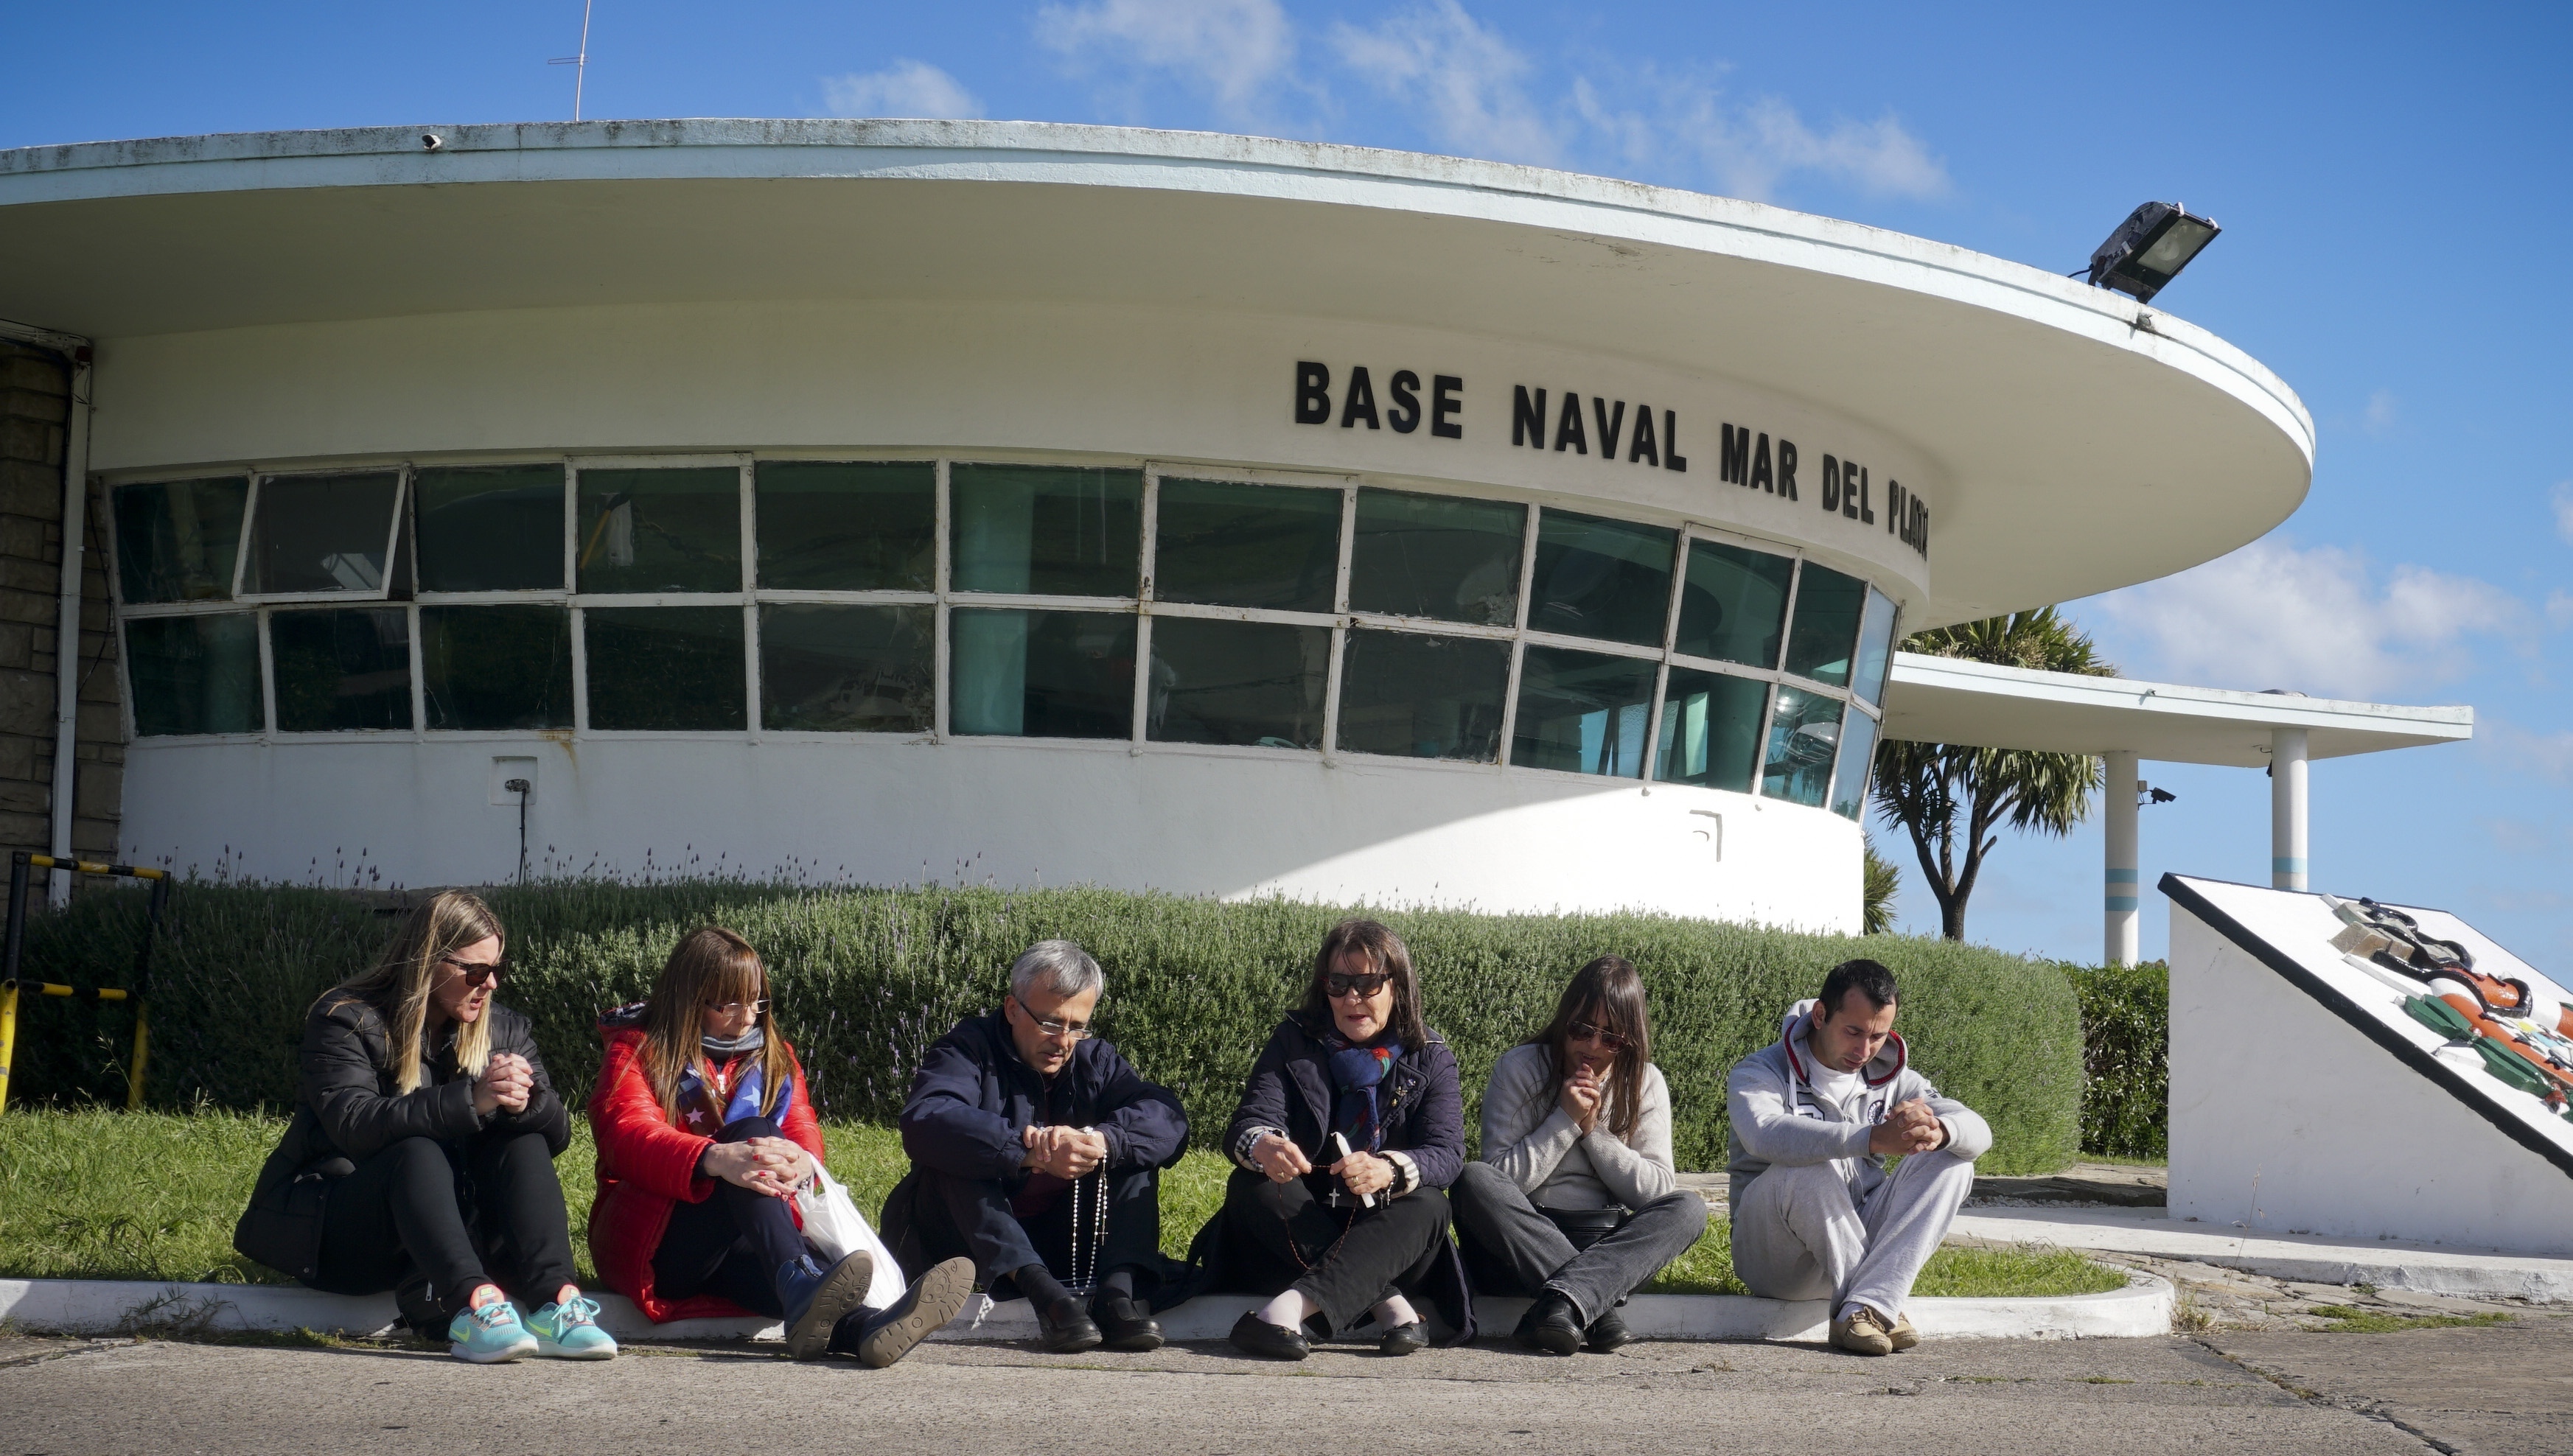 Families of the 44 crew members of the missing Argentine submarine ARA San Juan pray outside the Mar del Plata Naval Base, in Argentina, Tuesday, Nov. 21, 2017. The search continues for the missing submarine that has been lost since Nov. 15 in the South Atlantic. (AP Photo/Paul Byrne)